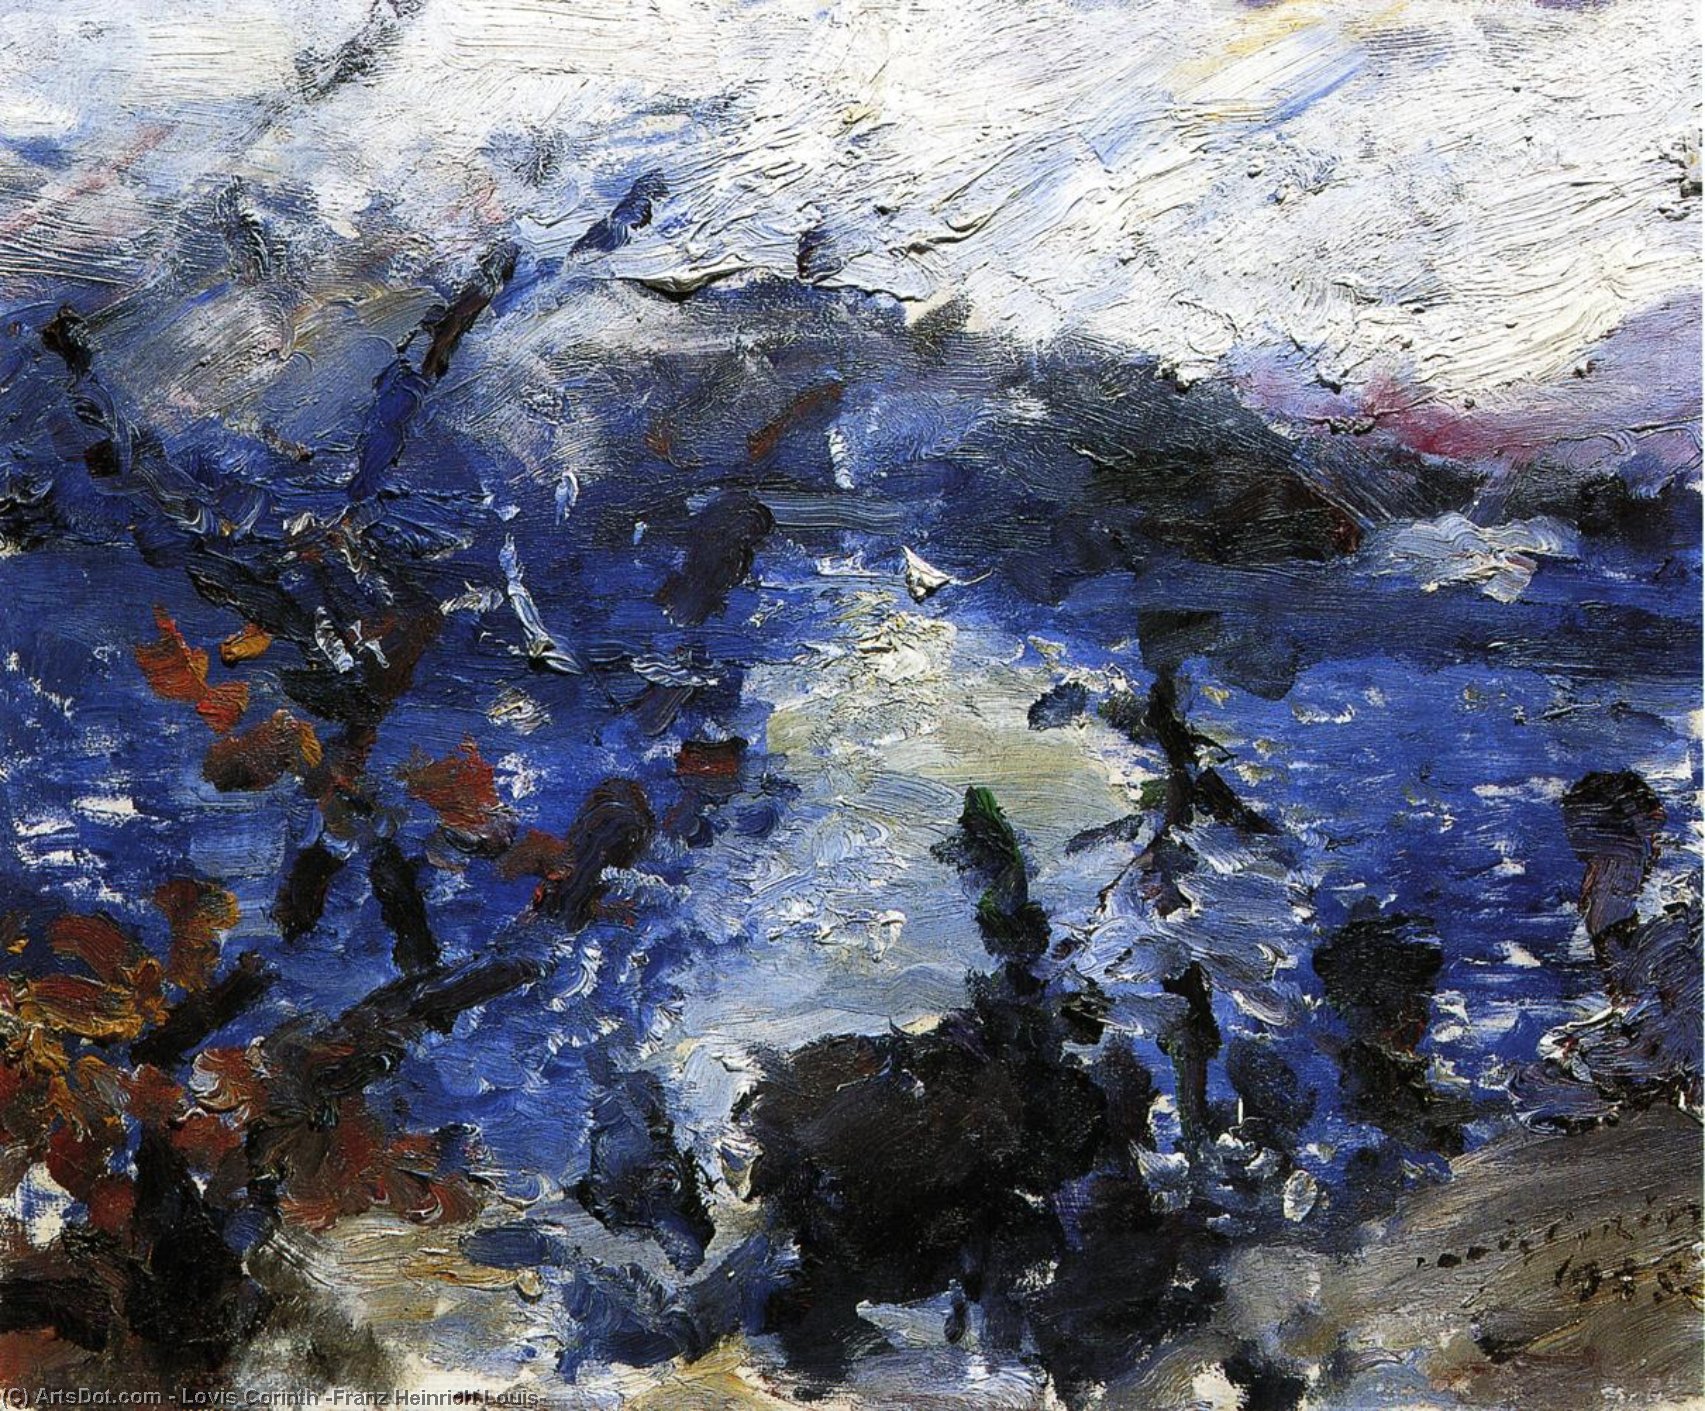 WikiOO.org - Encyclopedia of Fine Arts - Maľba, Artwork Lovis Corinth (Franz Heinrich Louis) - The Walchensee, Mountains Wreathed in Cloud